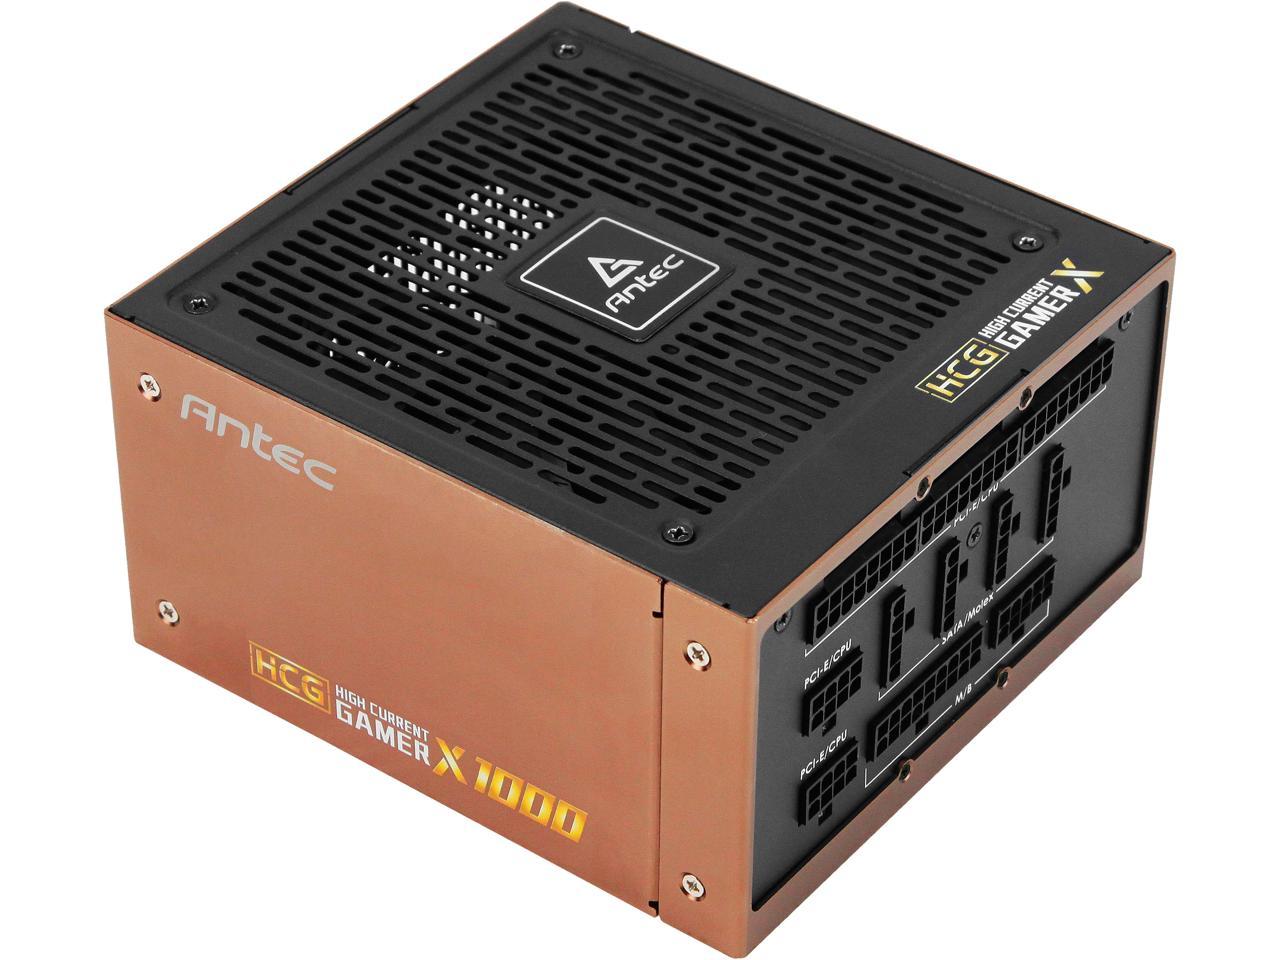 Antec High Current Gamer Extreme Series Hcg1000 Extreme 1000W 80 Plus Gold Atx12V V2.4 Power Supply